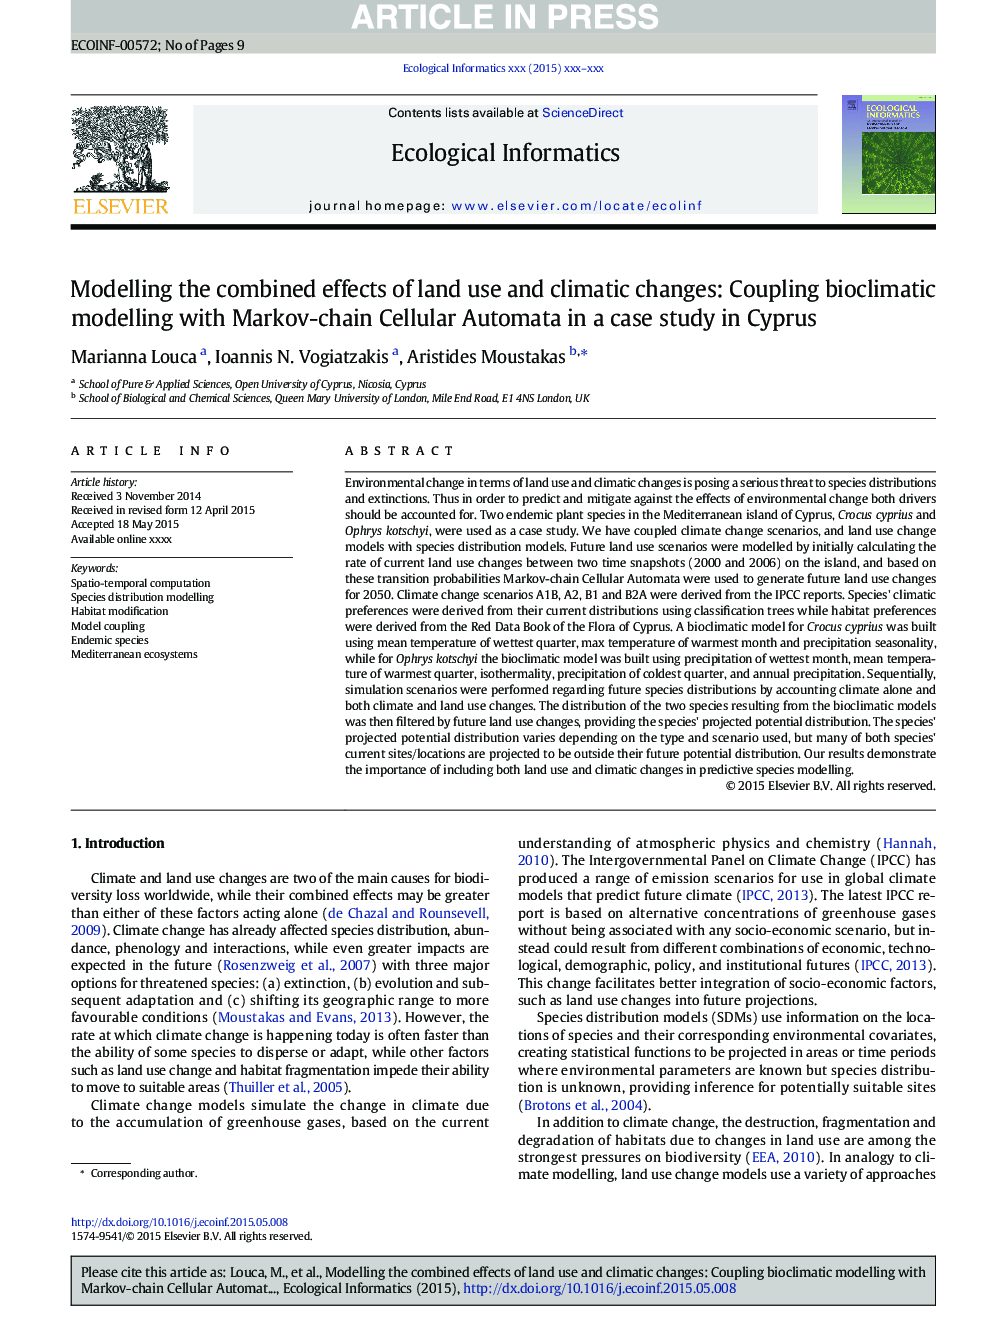 Modelling the combined effects of land use and climatic changes: Coupling bioclimatic modelling with Markov-chain Cellular Automata in a case study in Cyprus